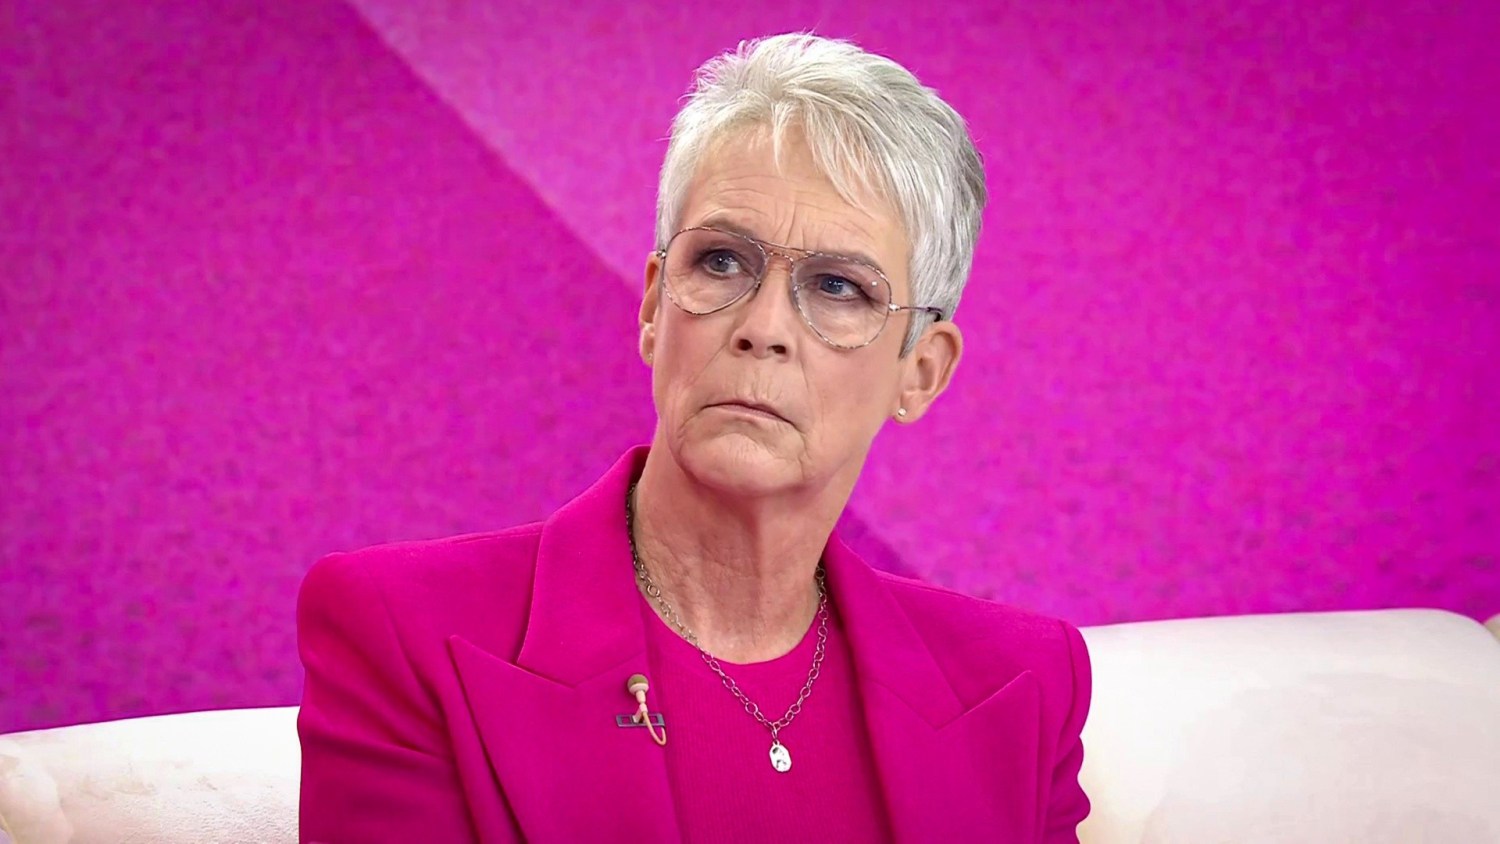 Jamie Lee Curtis Gives Advice On Aging: 'Don't Mess With Your Face'